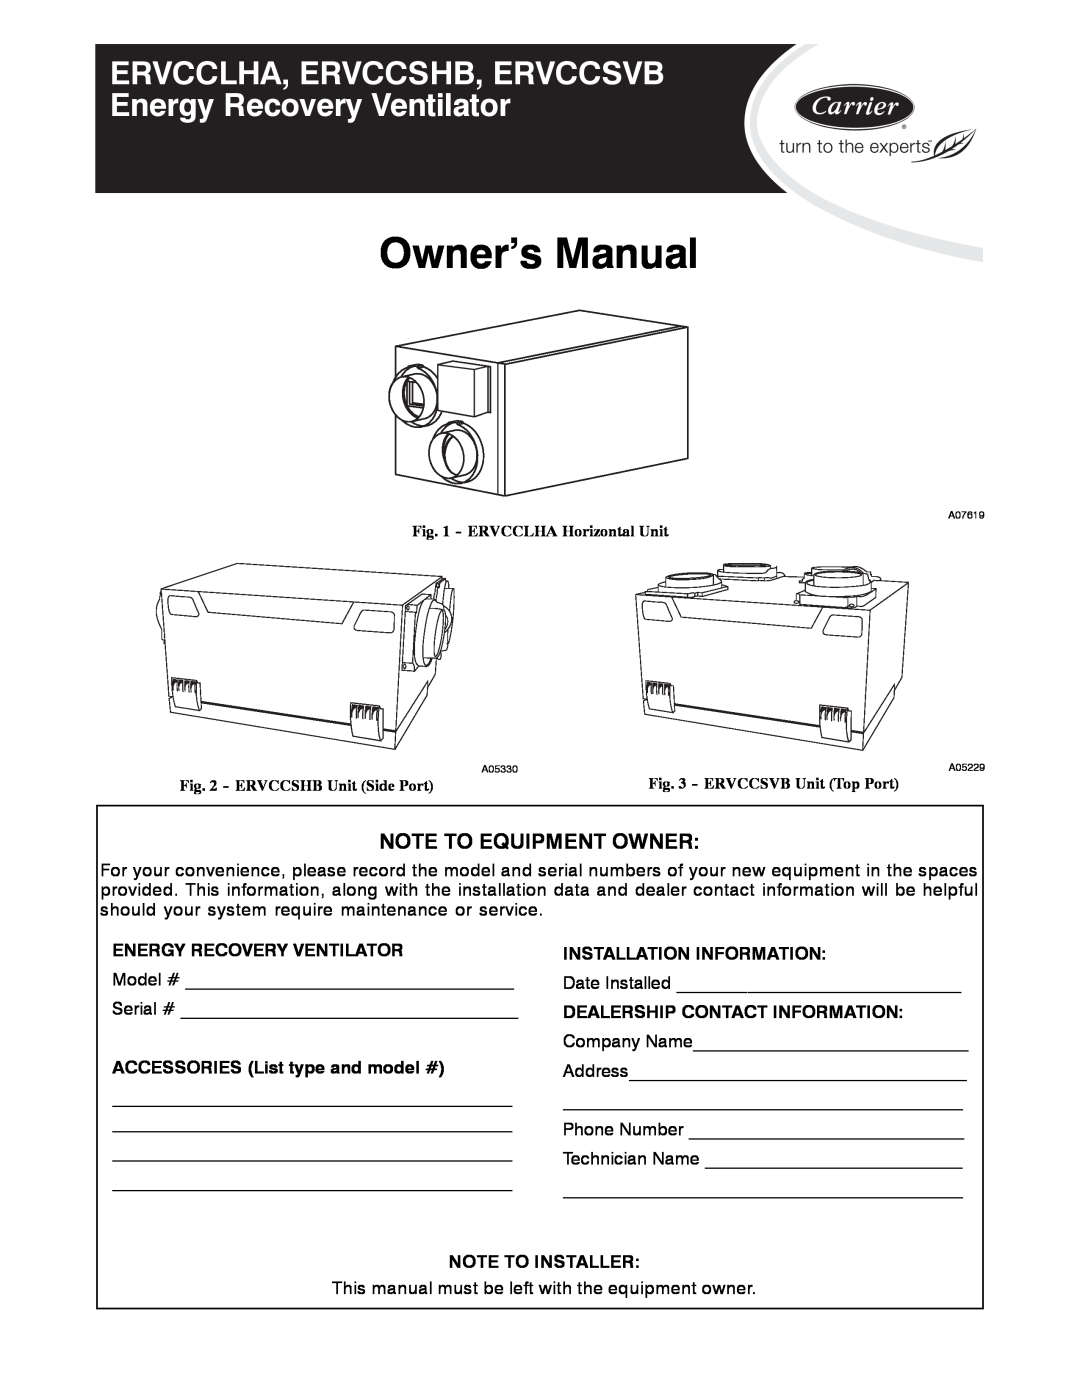 Carrier owner manual ERVCCLHA, ERVCCSHB, ERVCCSVB Energy Recovery Ventilator, Note To Equipment Owner 